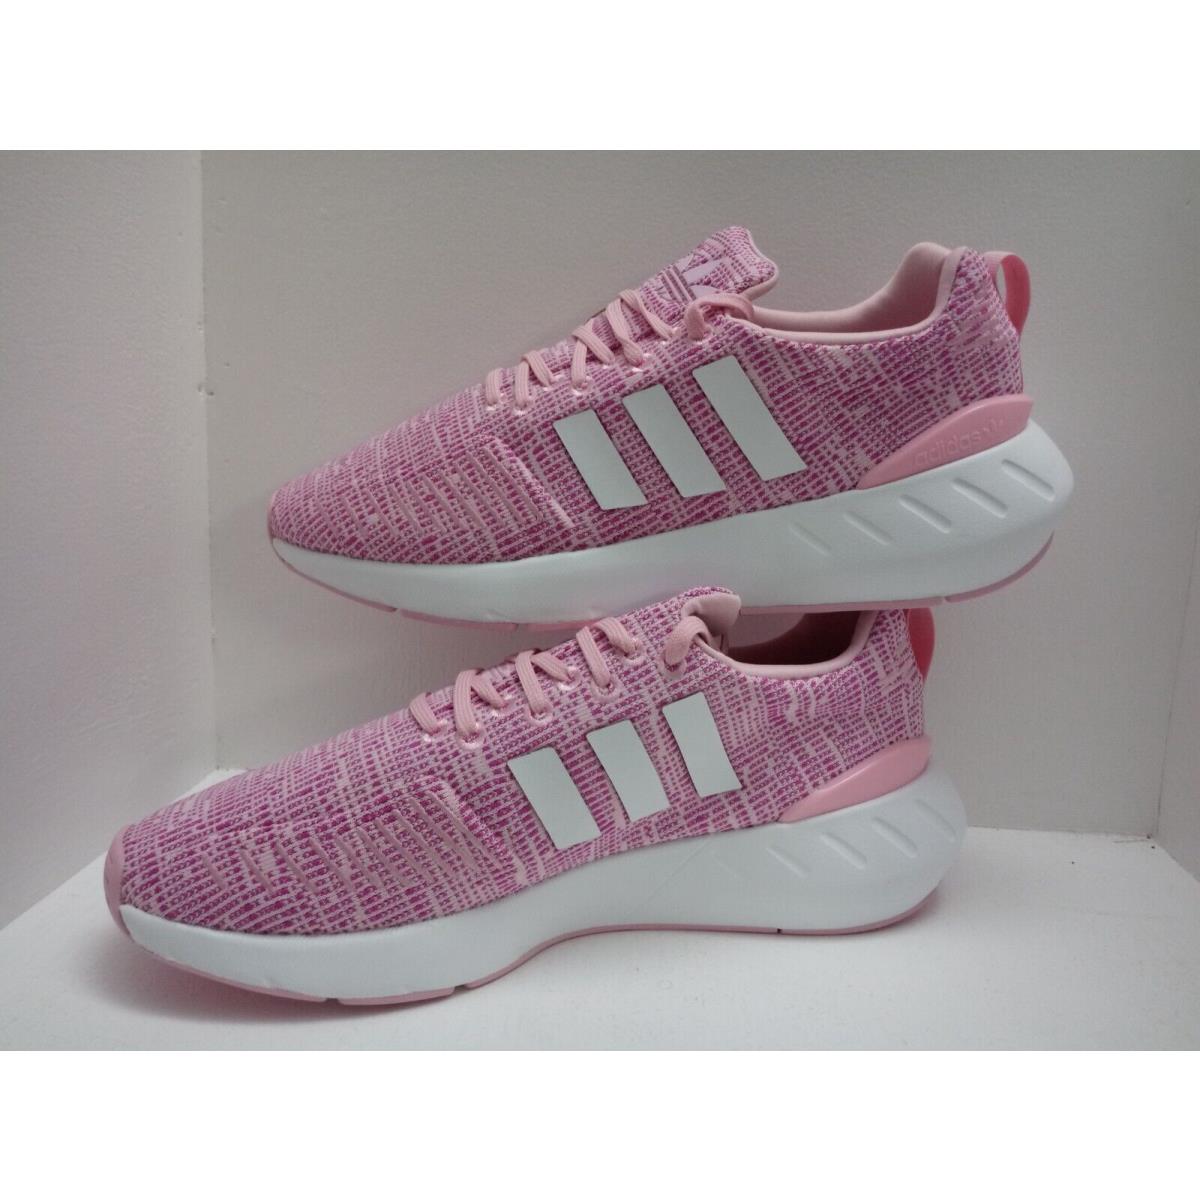 Adidas shoes  - PINK/WHITE 8